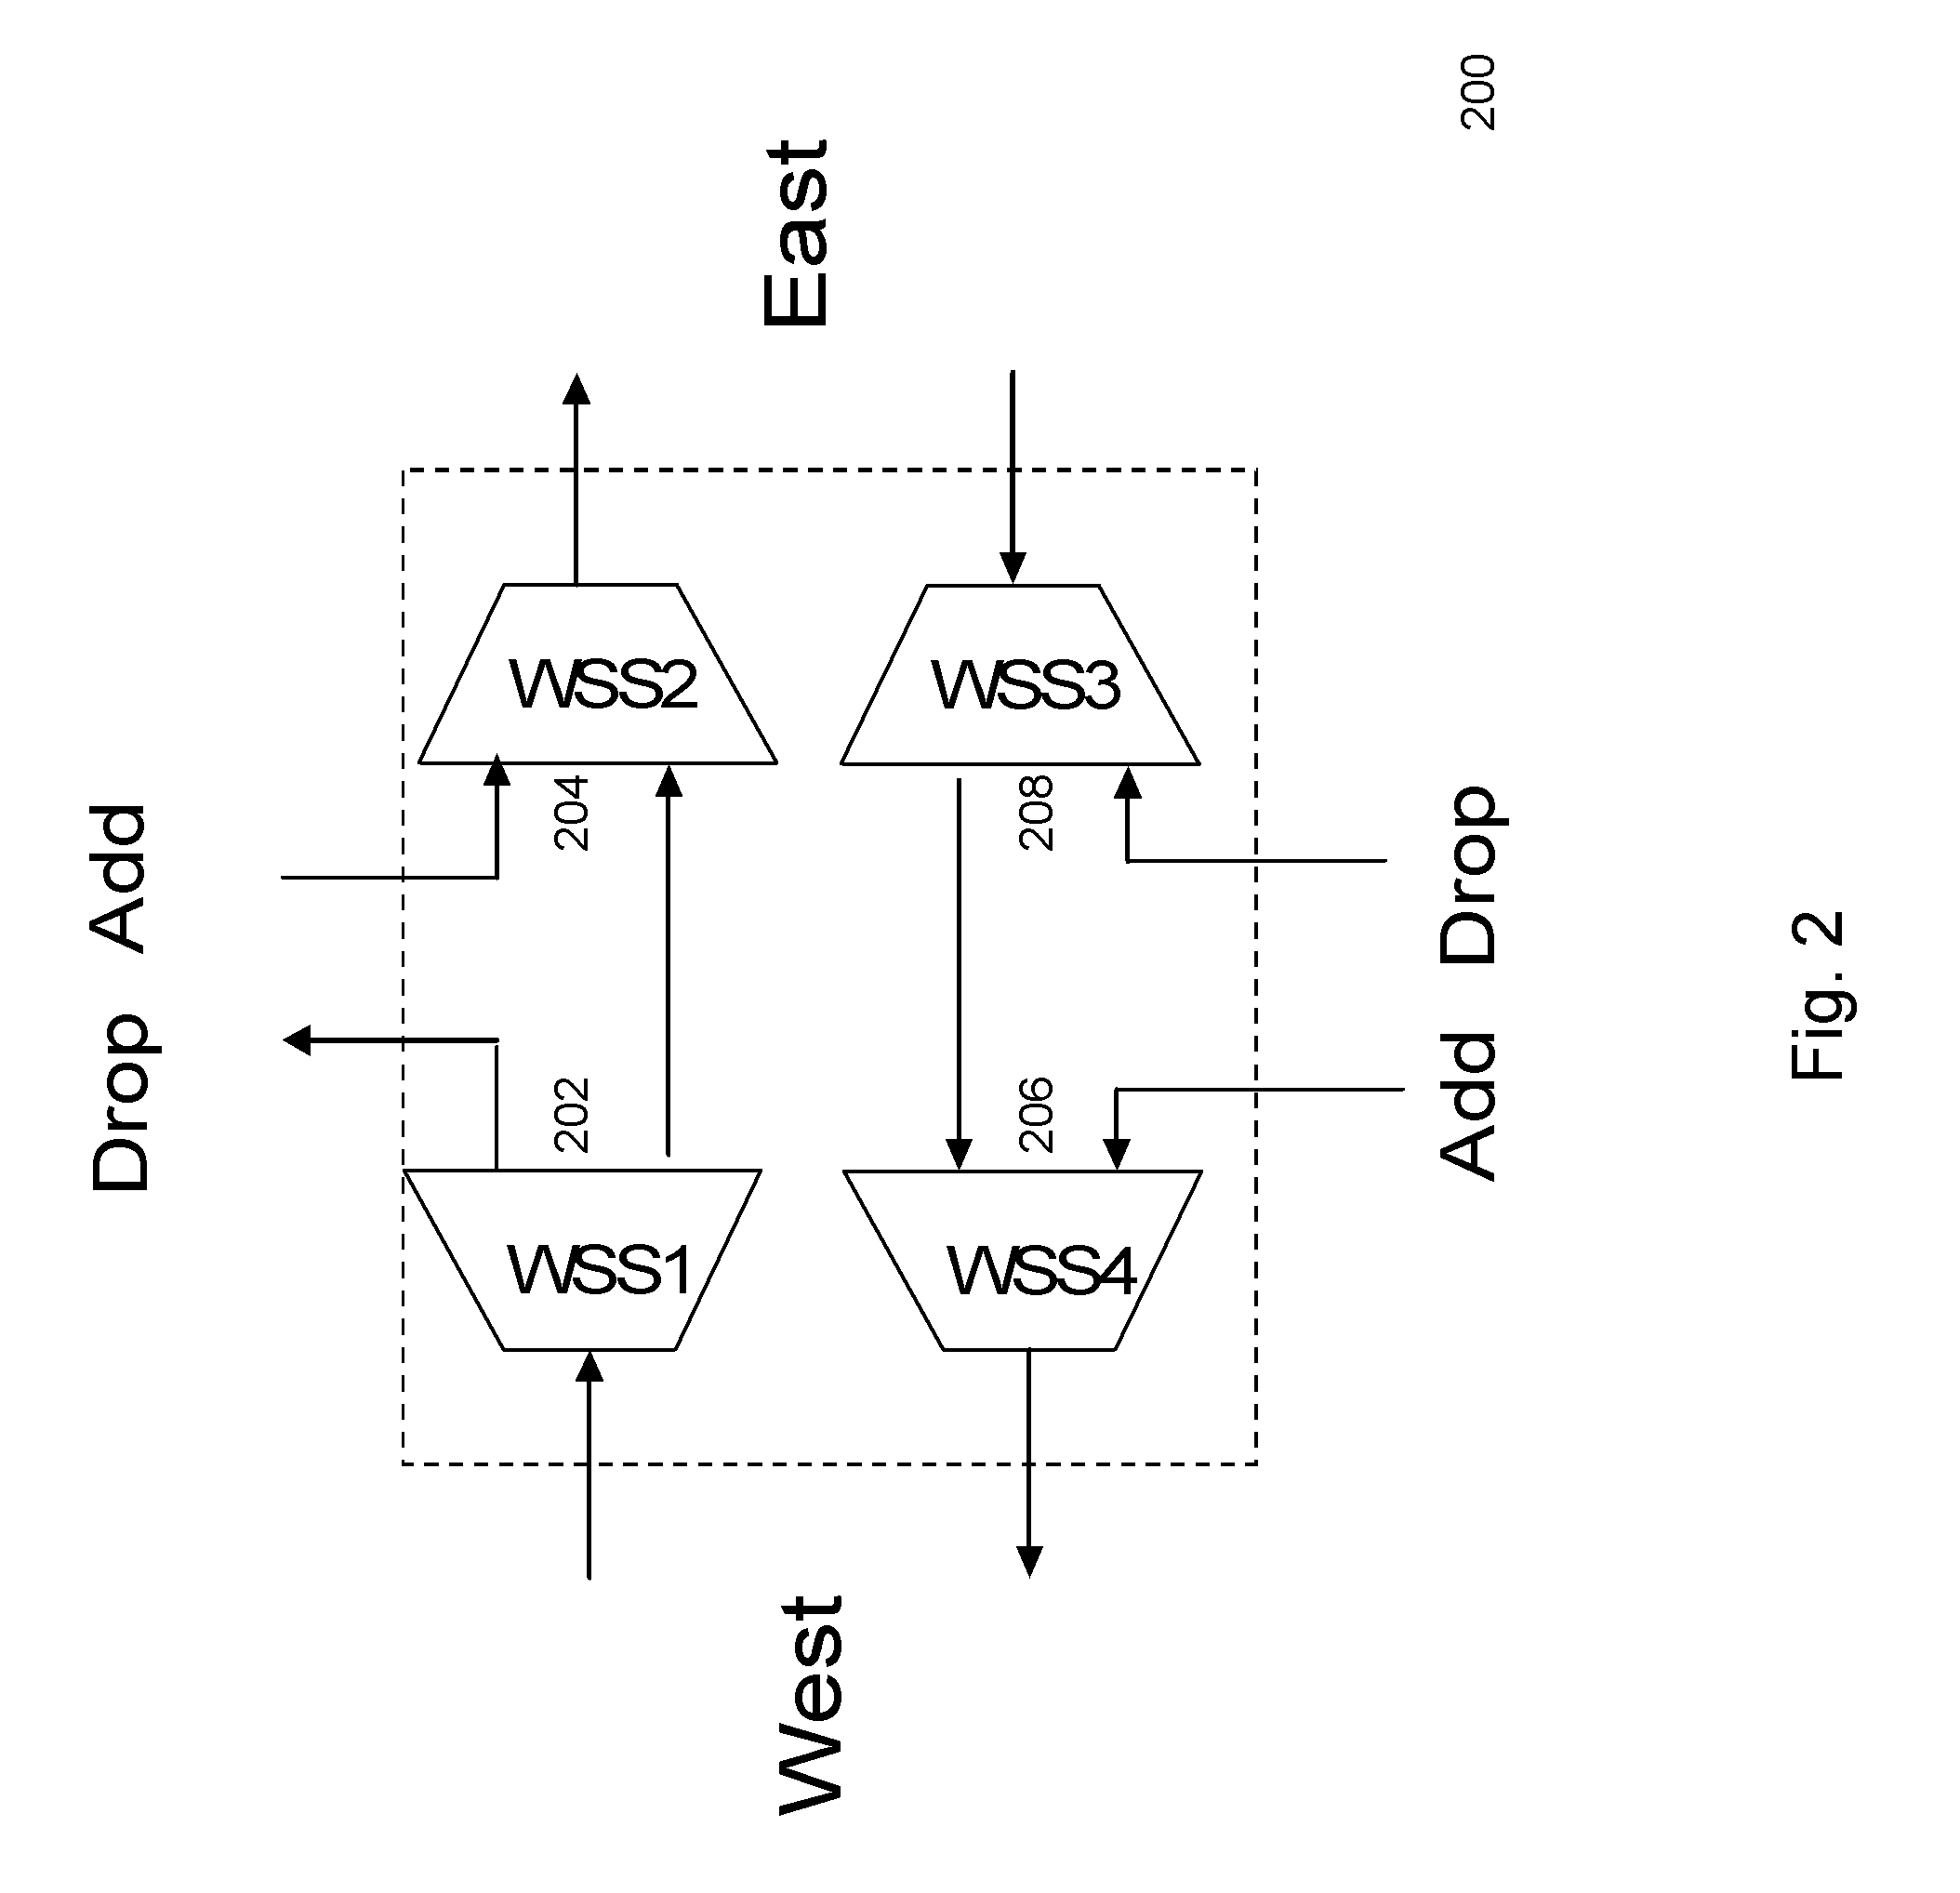 Apparatus and method for distributed compensation of narrow optical filtering effects in an optical network